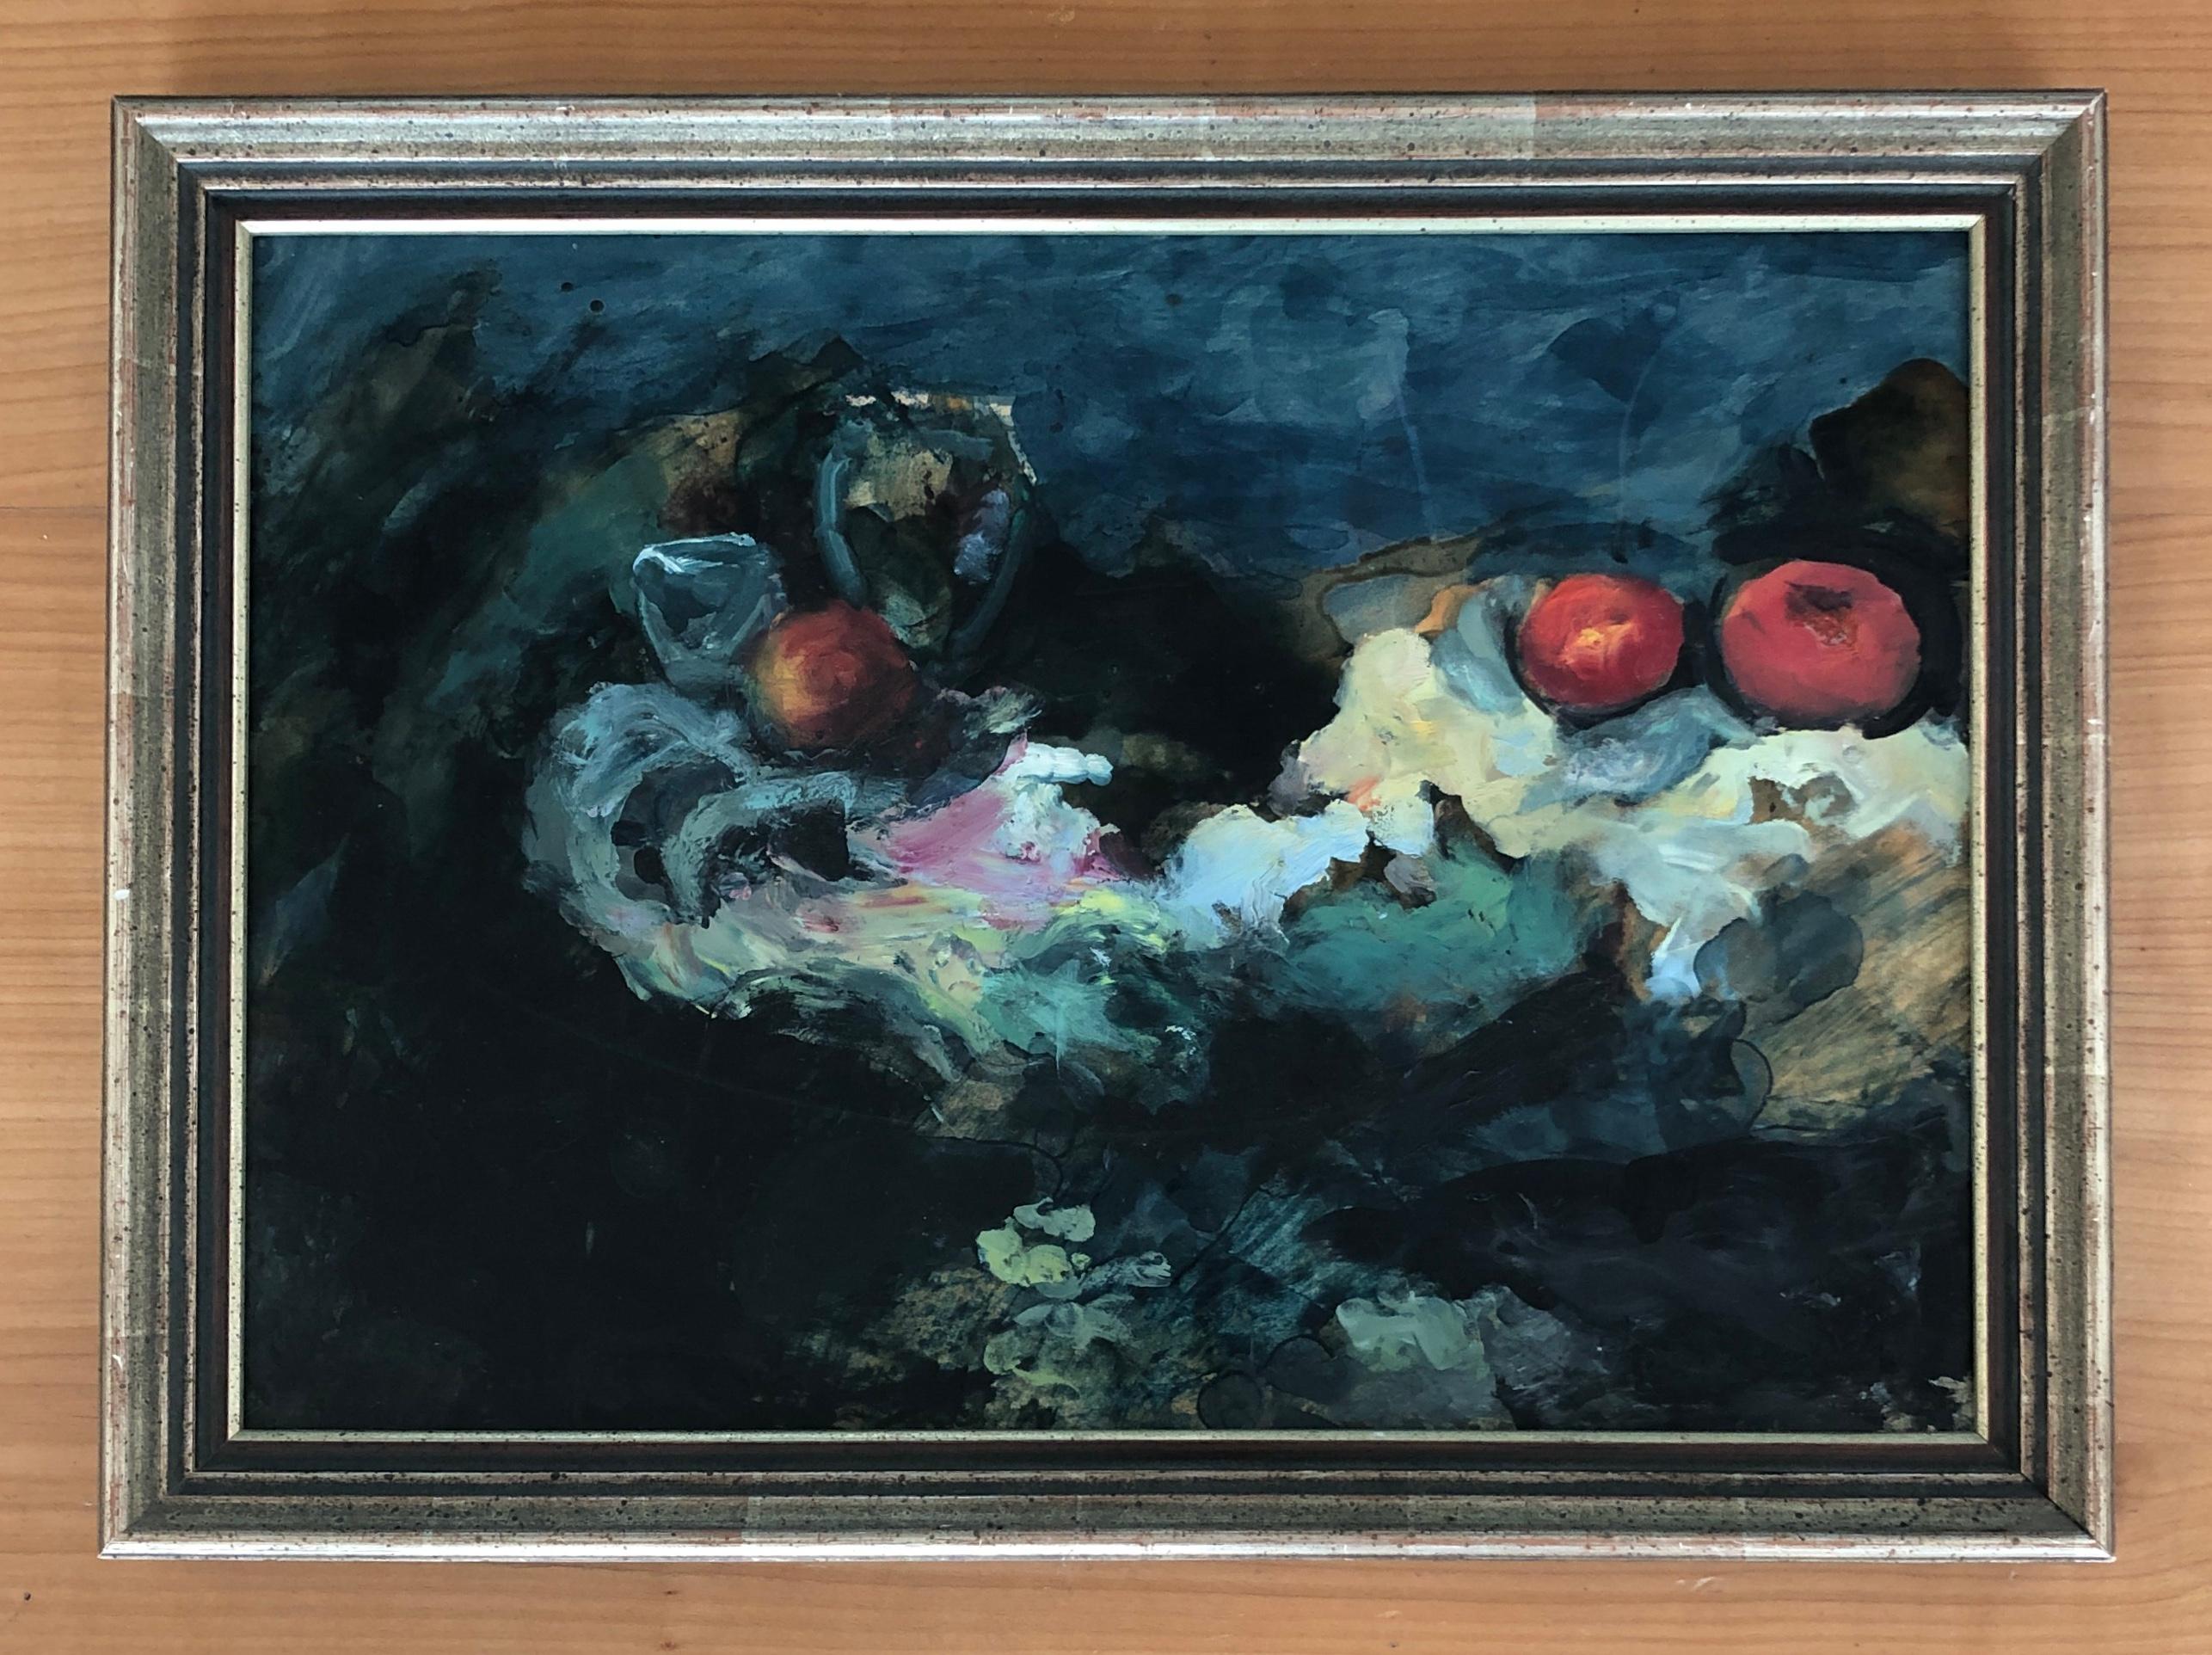 Fruit cup - Painting by Adolfo Carducci